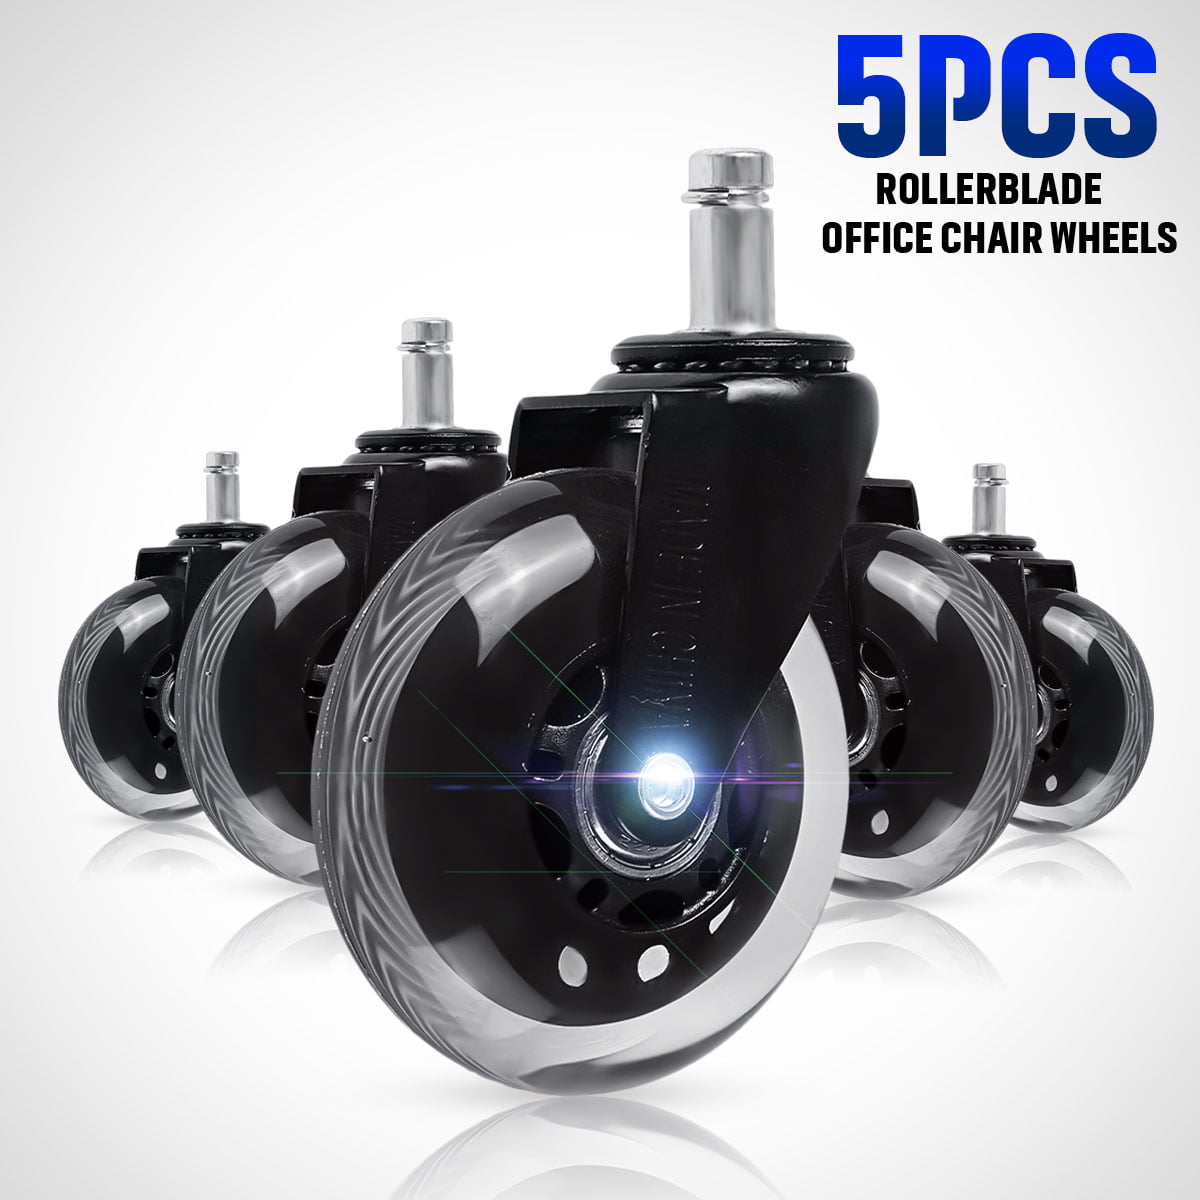 Soft Wheel Office Chair Casters Service Caster Hardwood Safe Non Marking Set of 5 2 Black Twin Wheels with Brakes